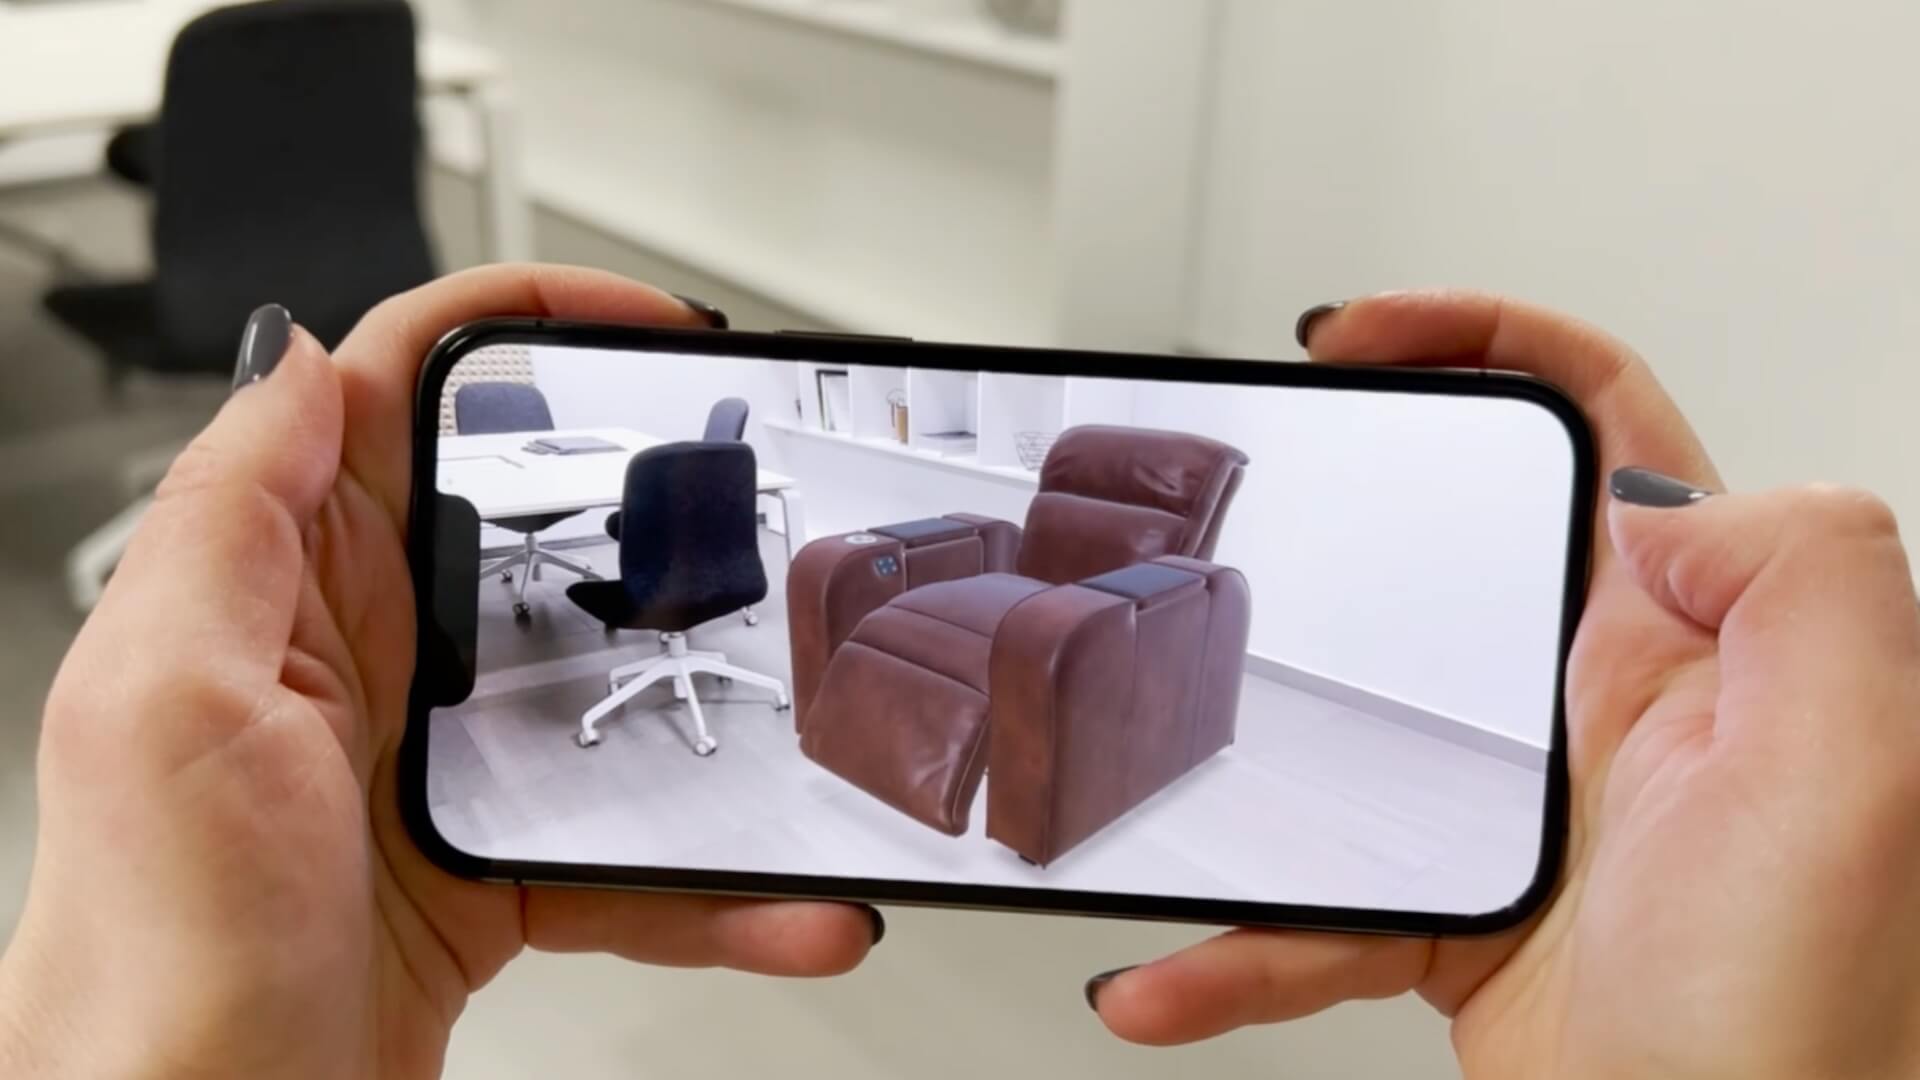 AR Application for Interactive 3D Furniture Presentation